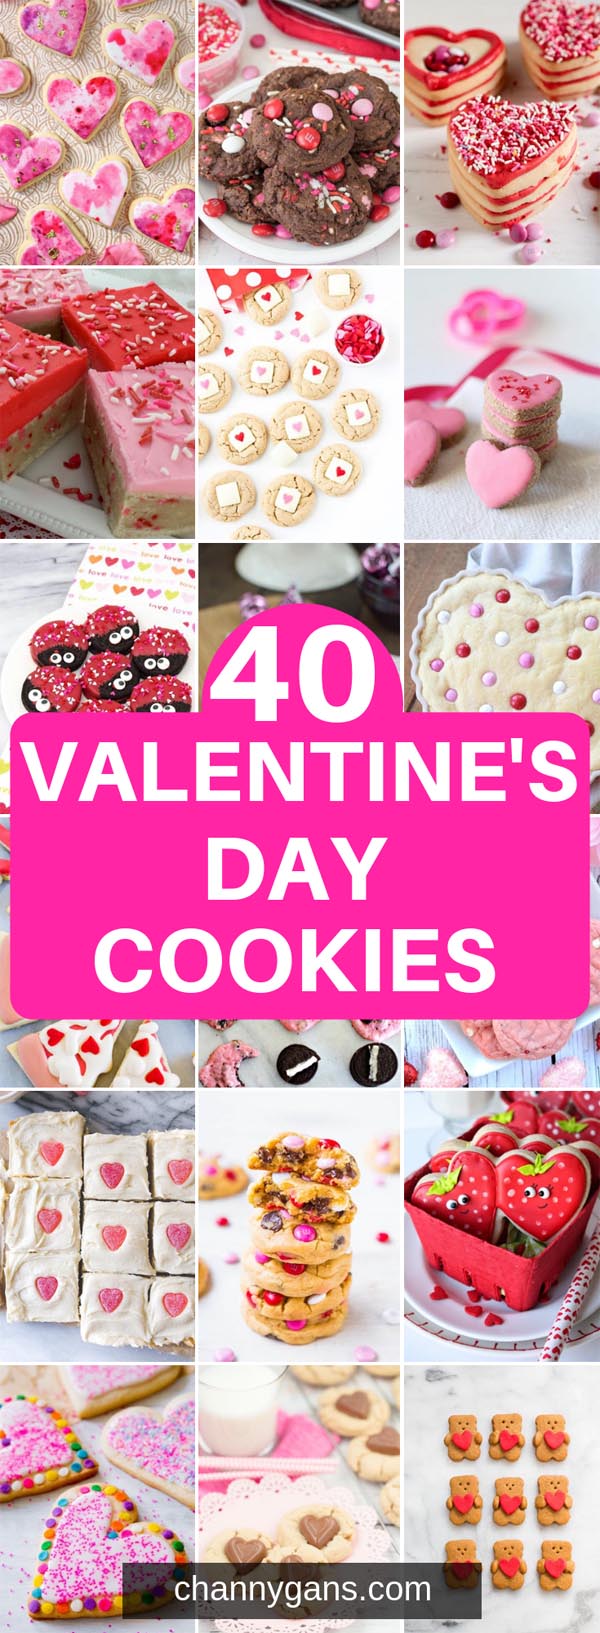 40 Valentine's Day Cookies. If you've been needing another excuse to bake cookies, here it is! 40 cute valentine's day cookies you can make for your loved ones this Valentine's day!